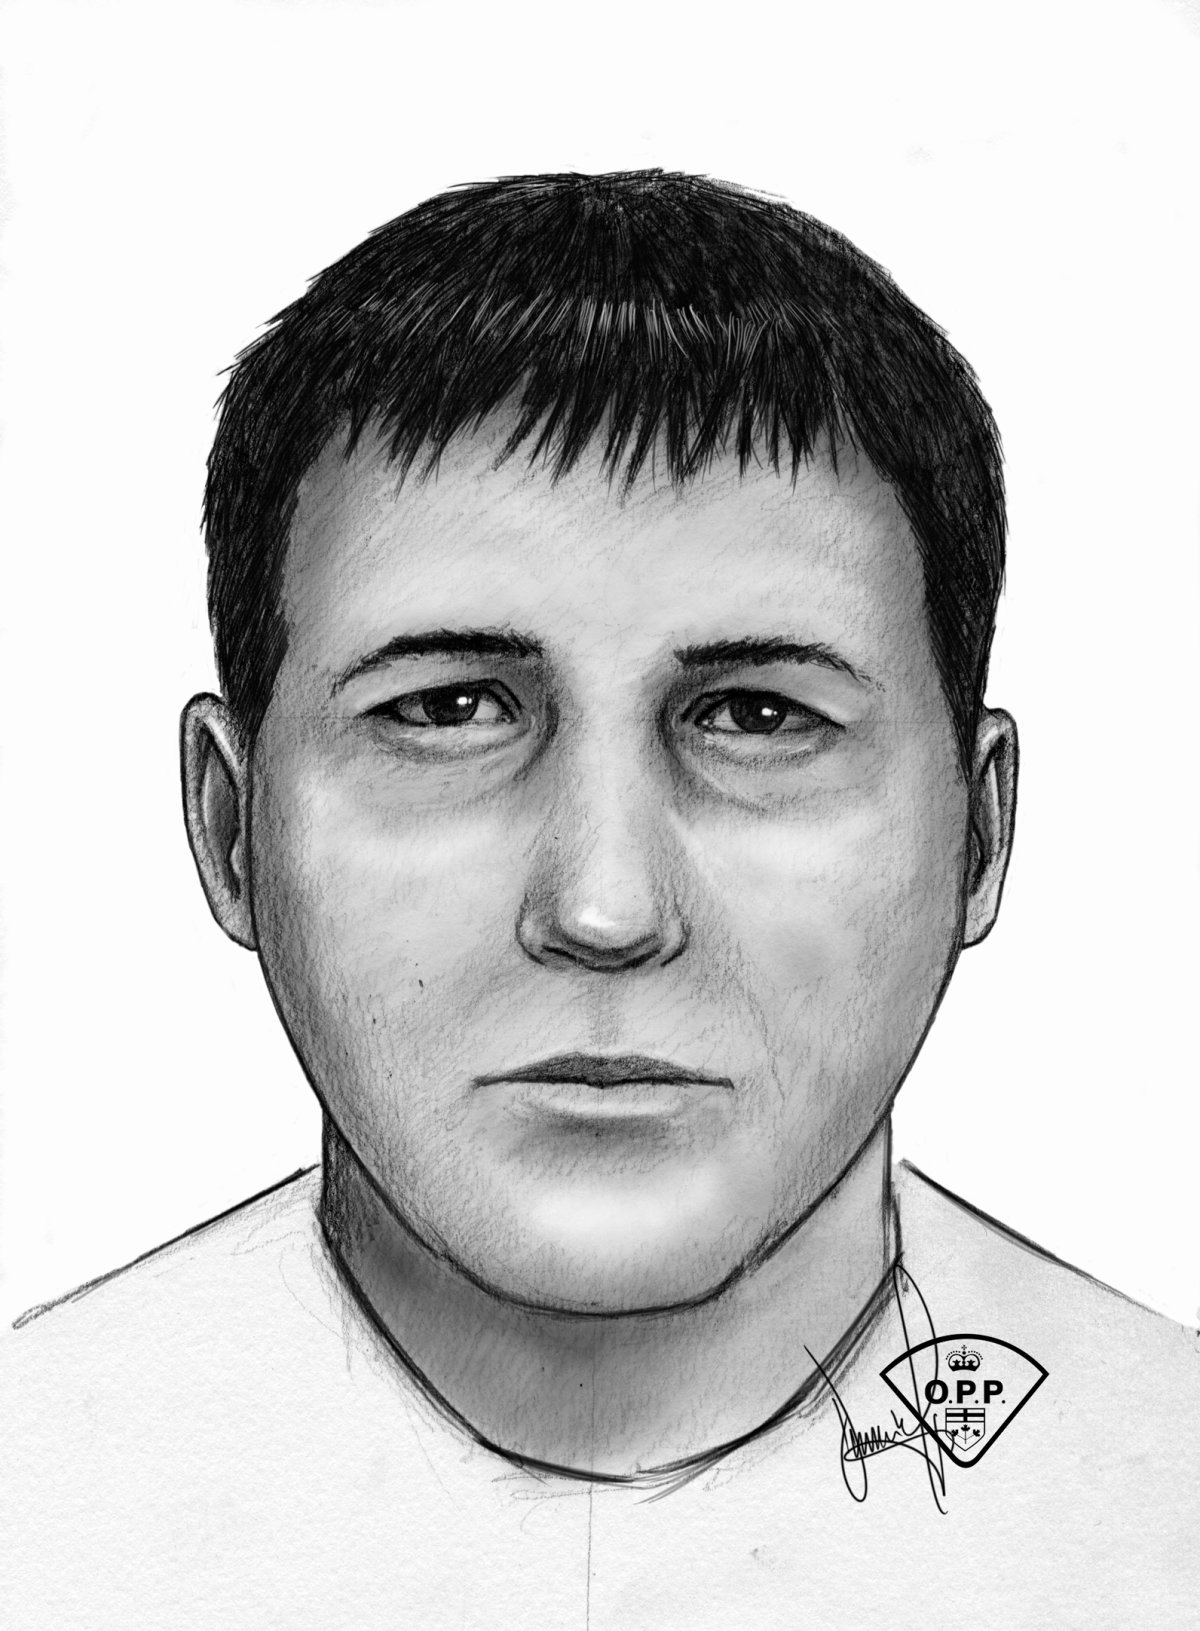 Sketch of one of the suspects in Canfield carjacking.